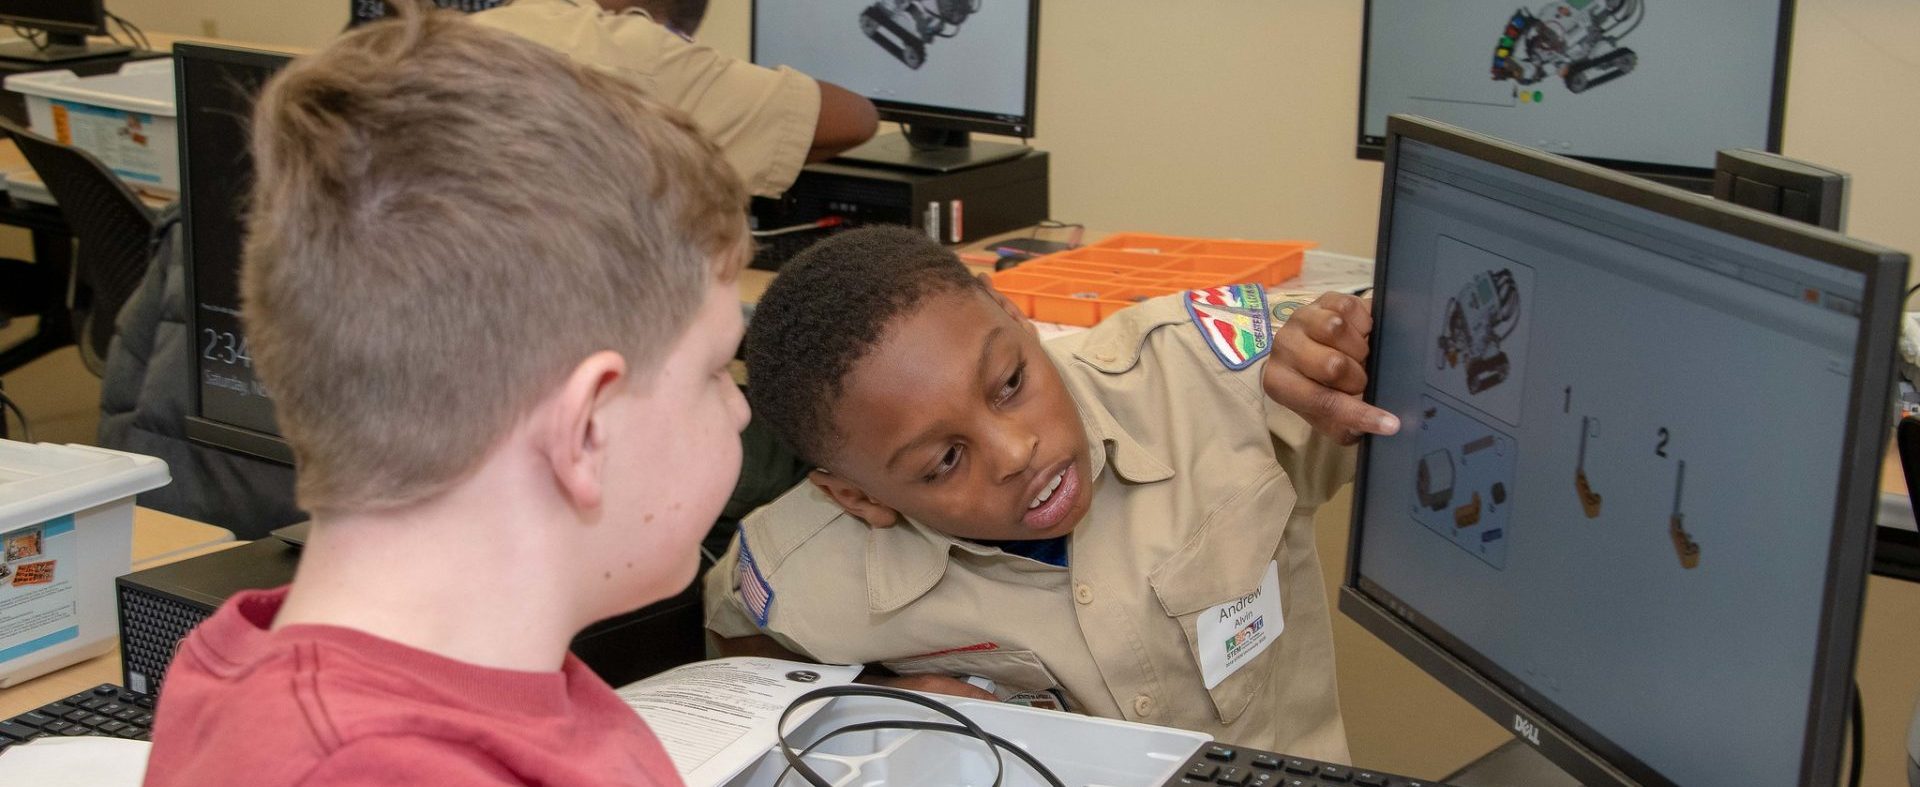 Scouts working on a computer